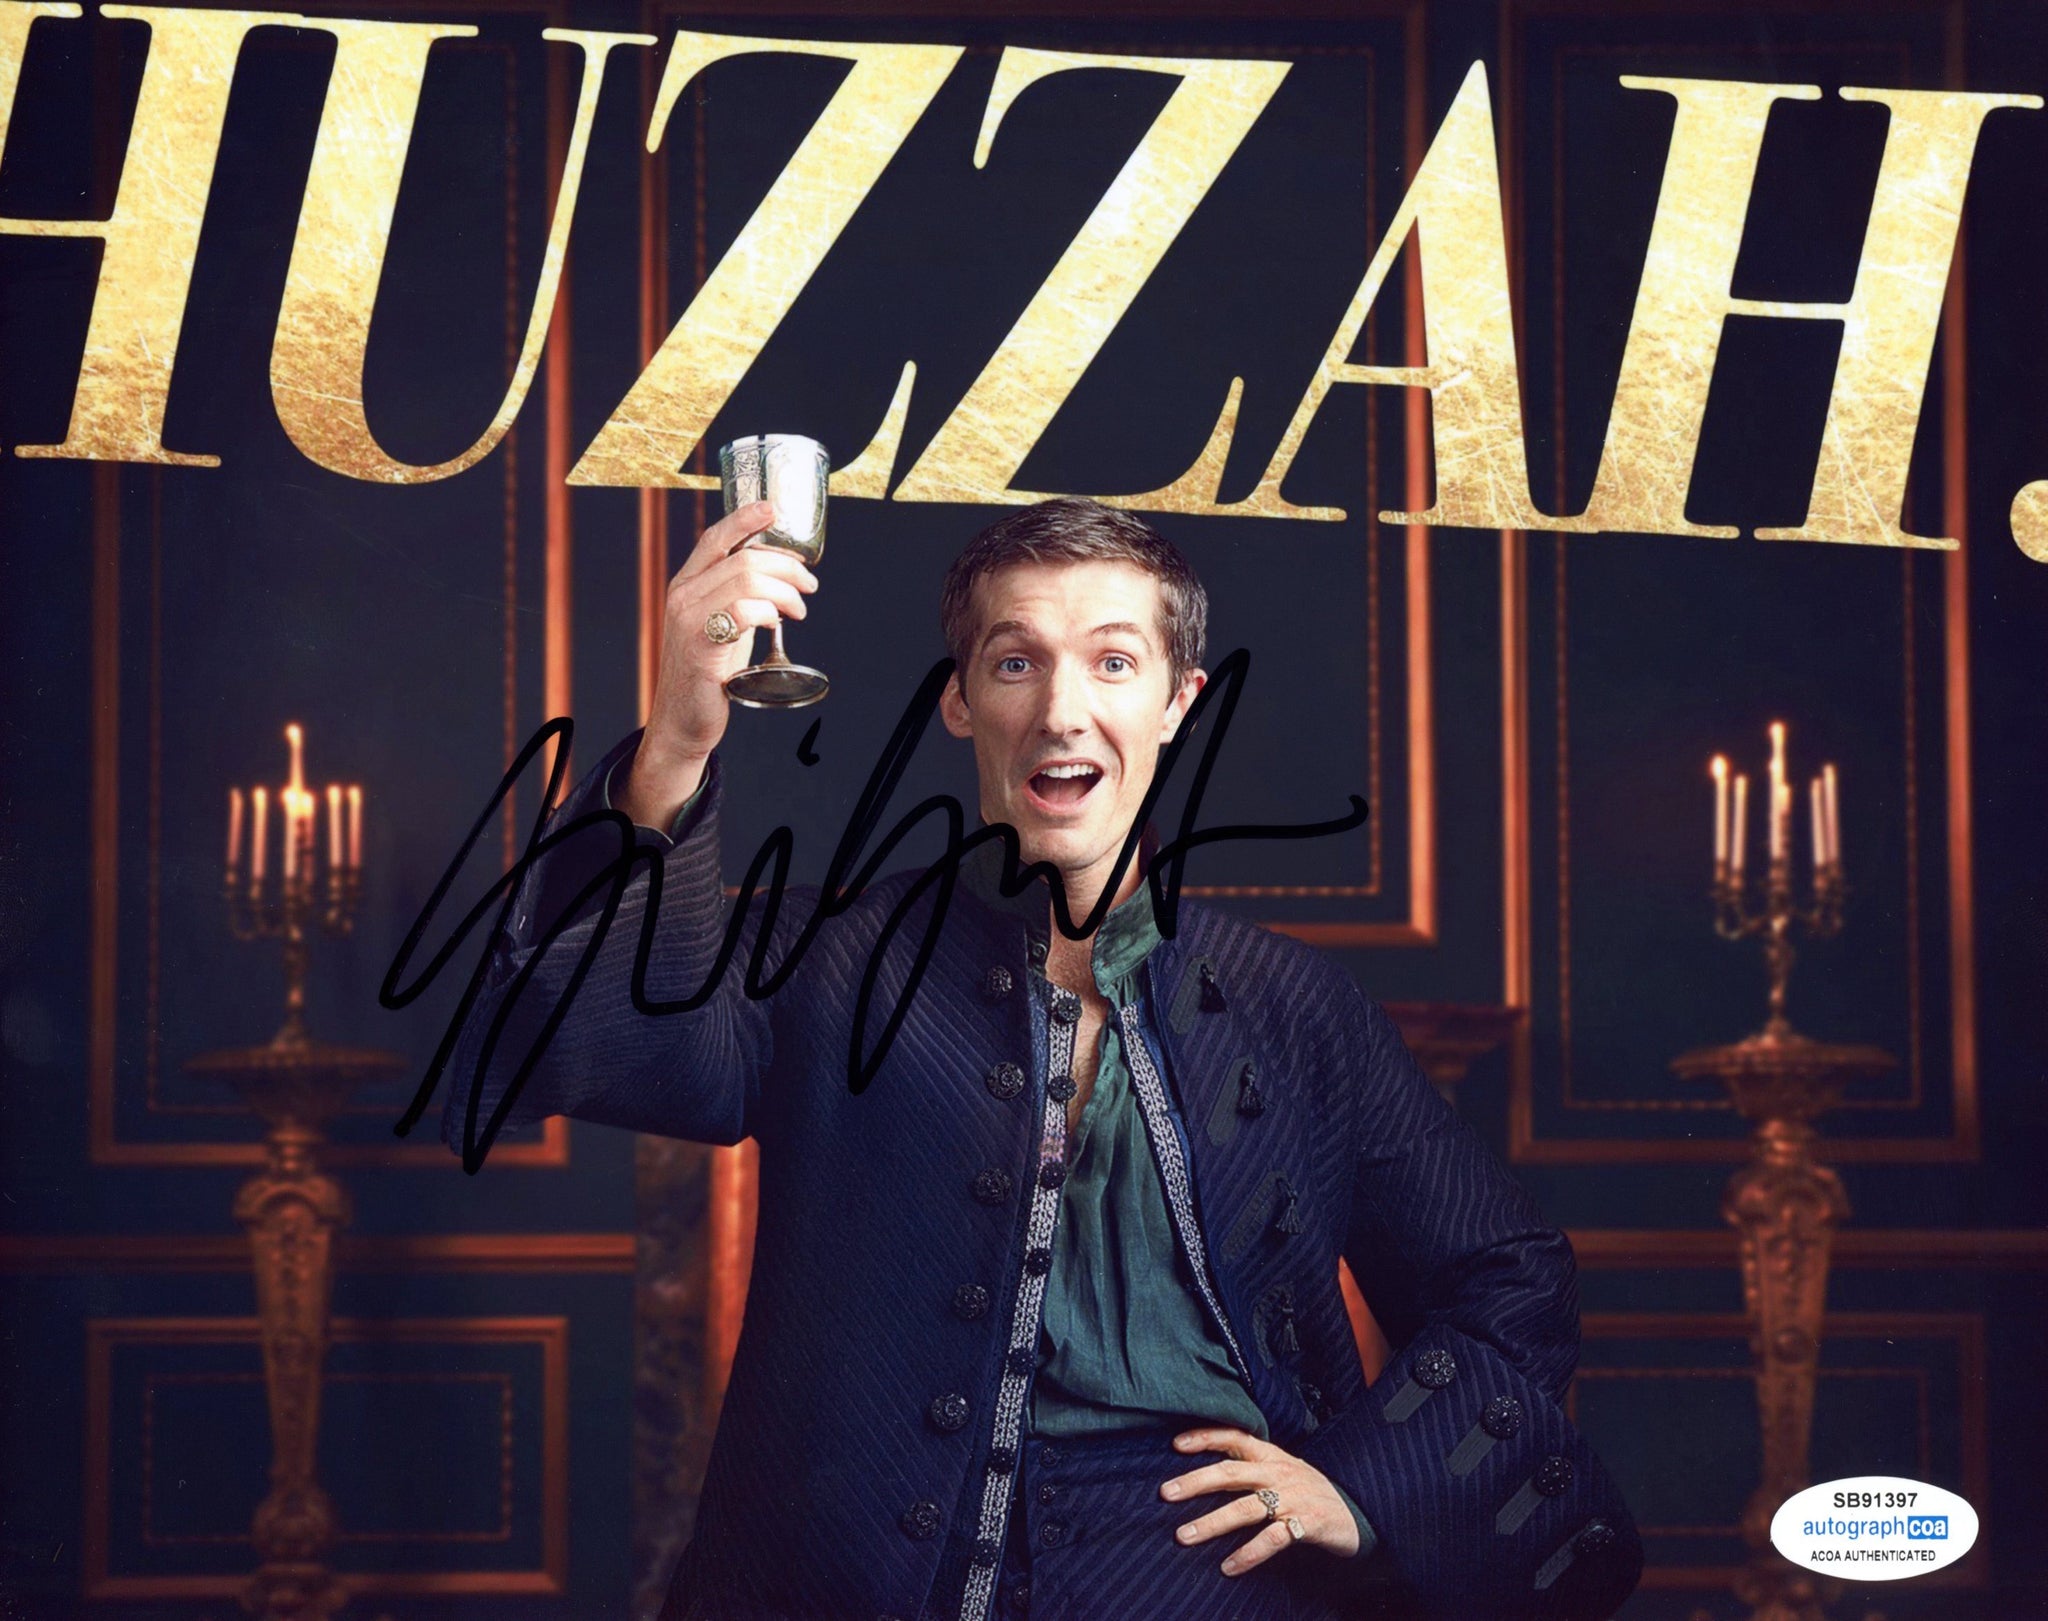 Gwilym Lee The Great Signed Autograph 8x10 Photo ACOA